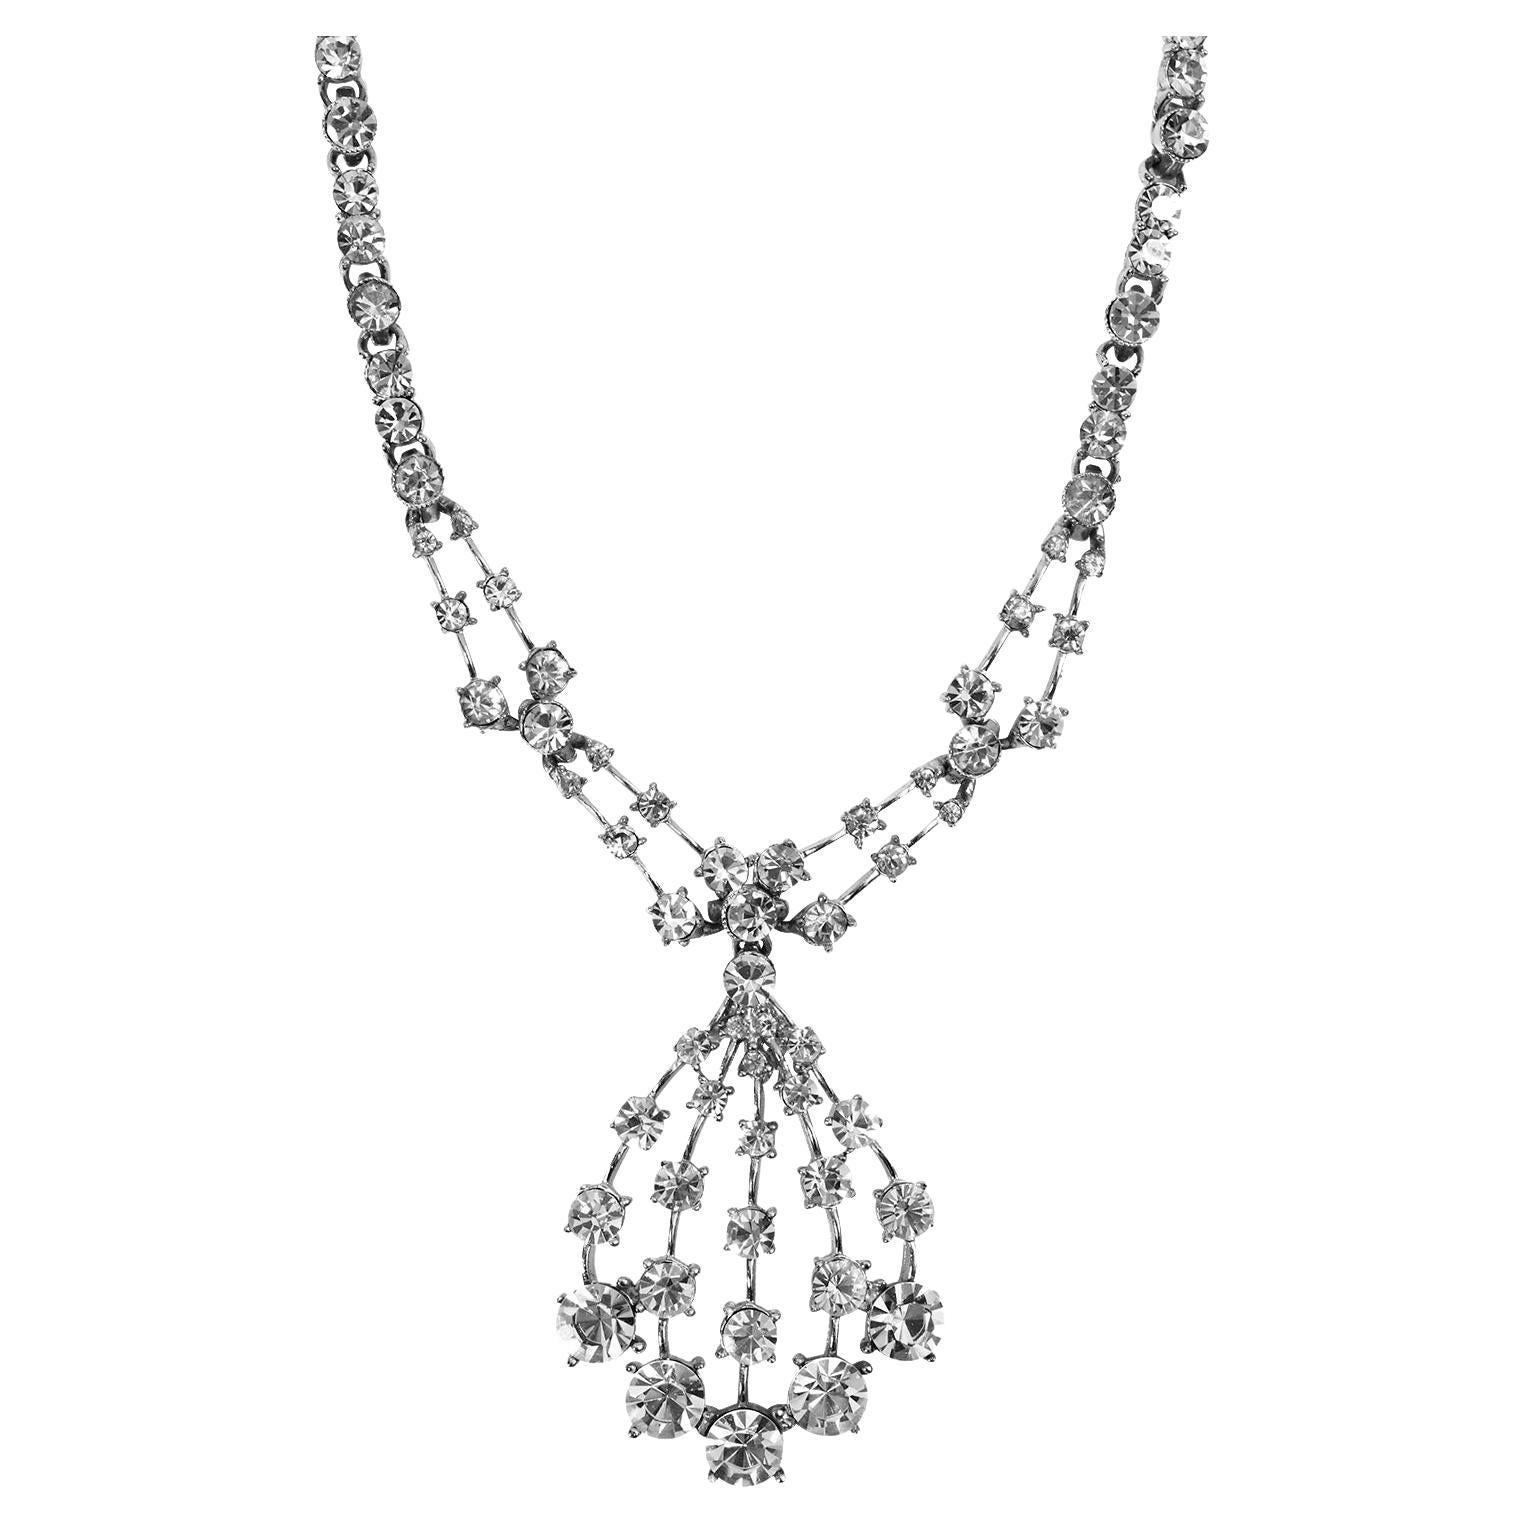 Vintage Bogoff Diamante Drop Necklace Circa 1960s. Has drop necklace and is on links of stones with designs.  There are two 6 stone designs with a stone separating them and that leads to a higher stone and then two lower stones and then the pattern